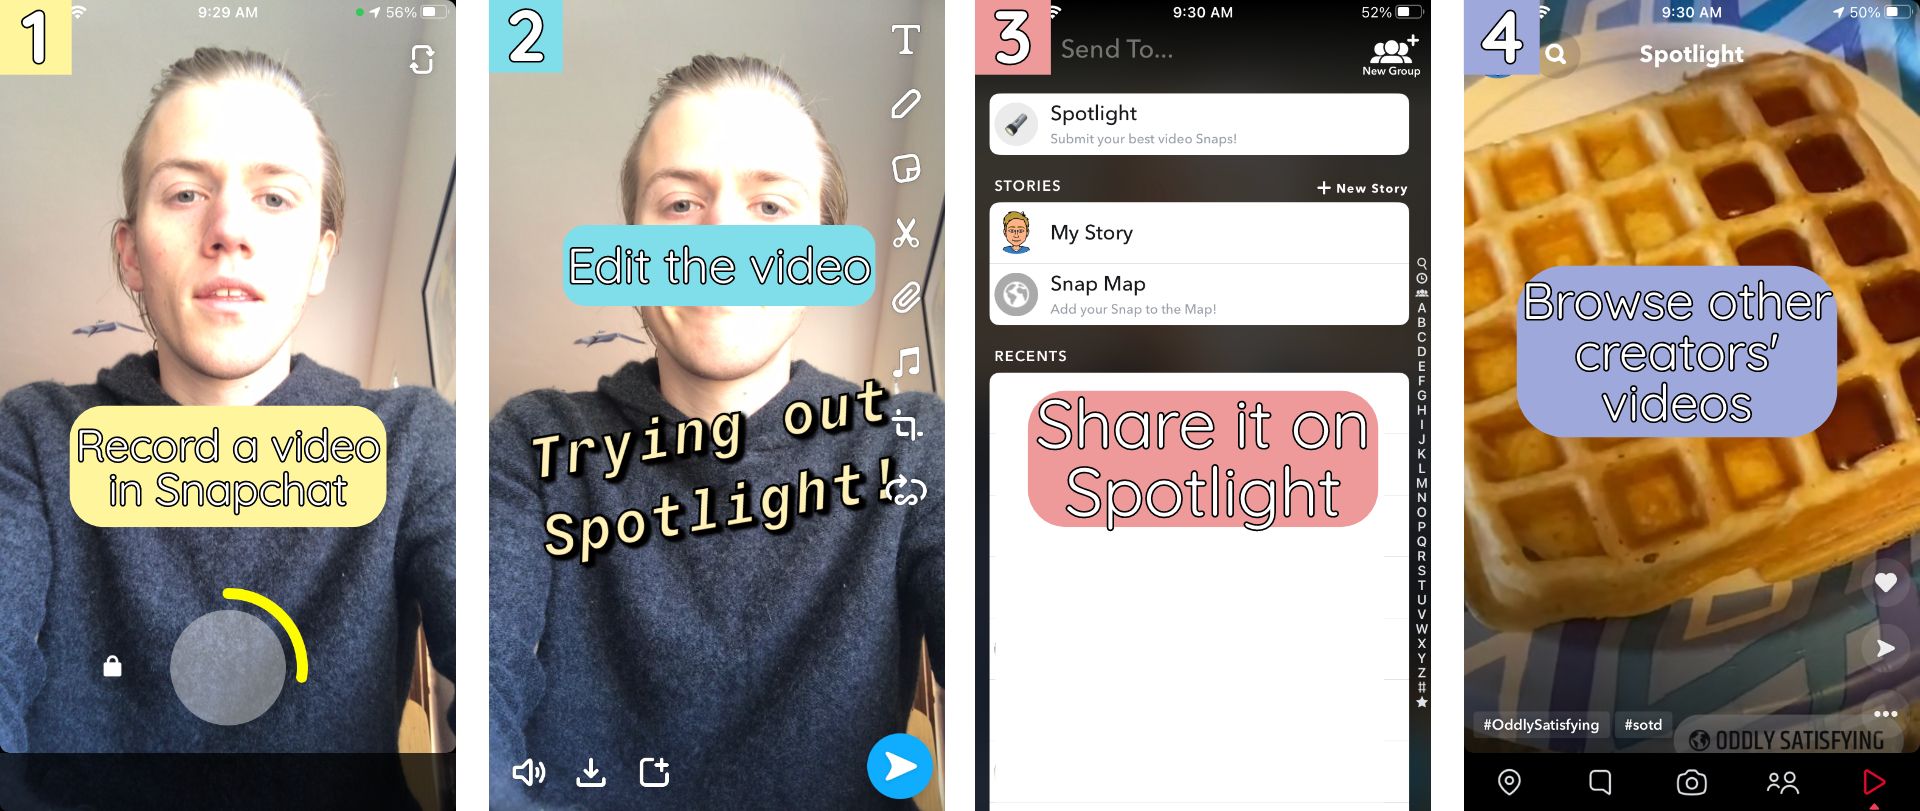 Screenshots demonstrating how to share and browse Snapchat's Spotlight videos. 